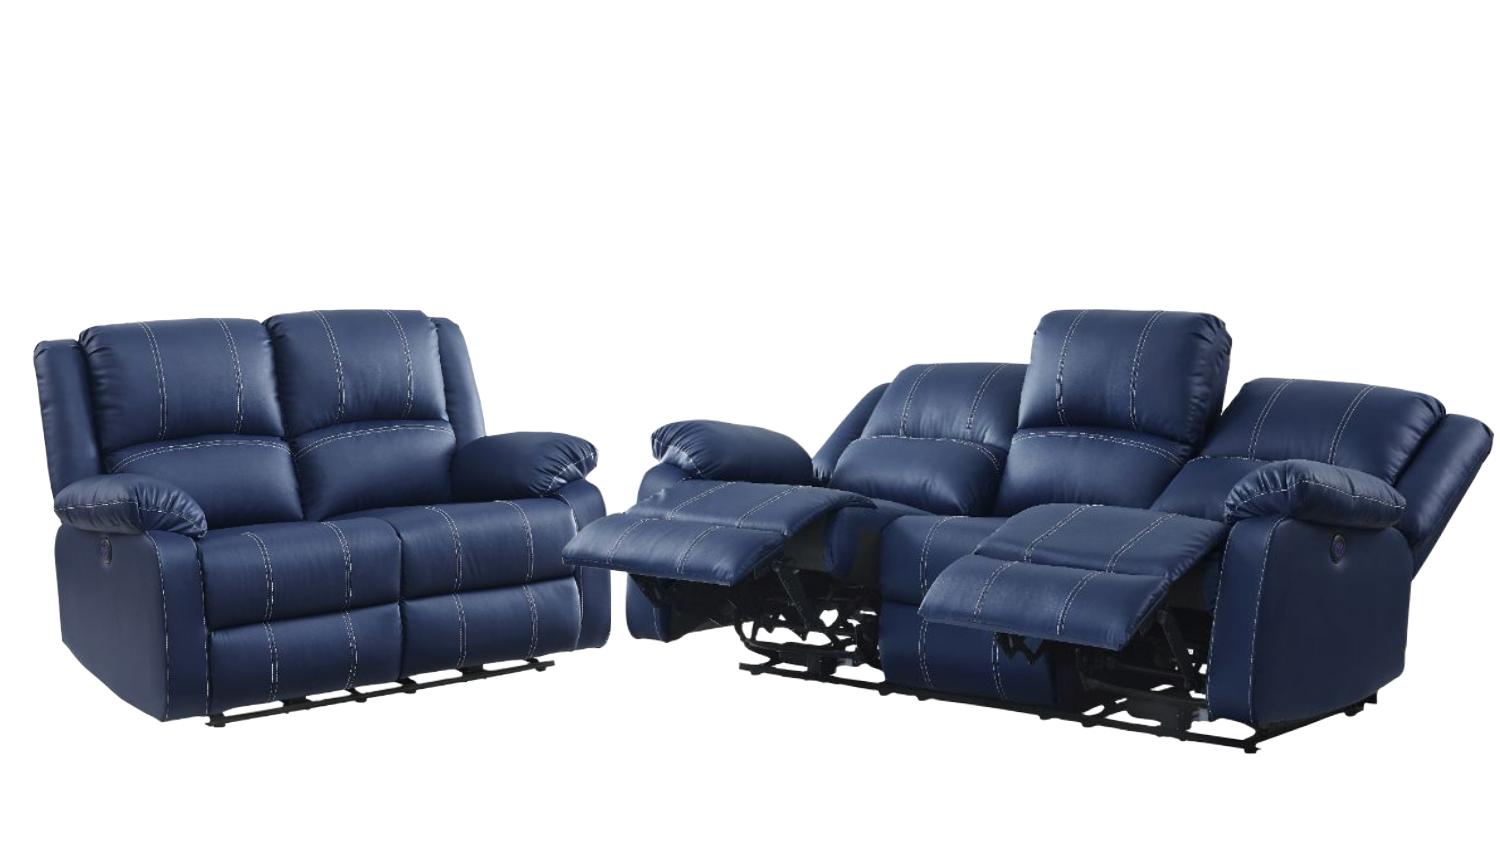 Modern Sofa and Loveseat Zuriel 54615-2pcs in Blue Faux Leather